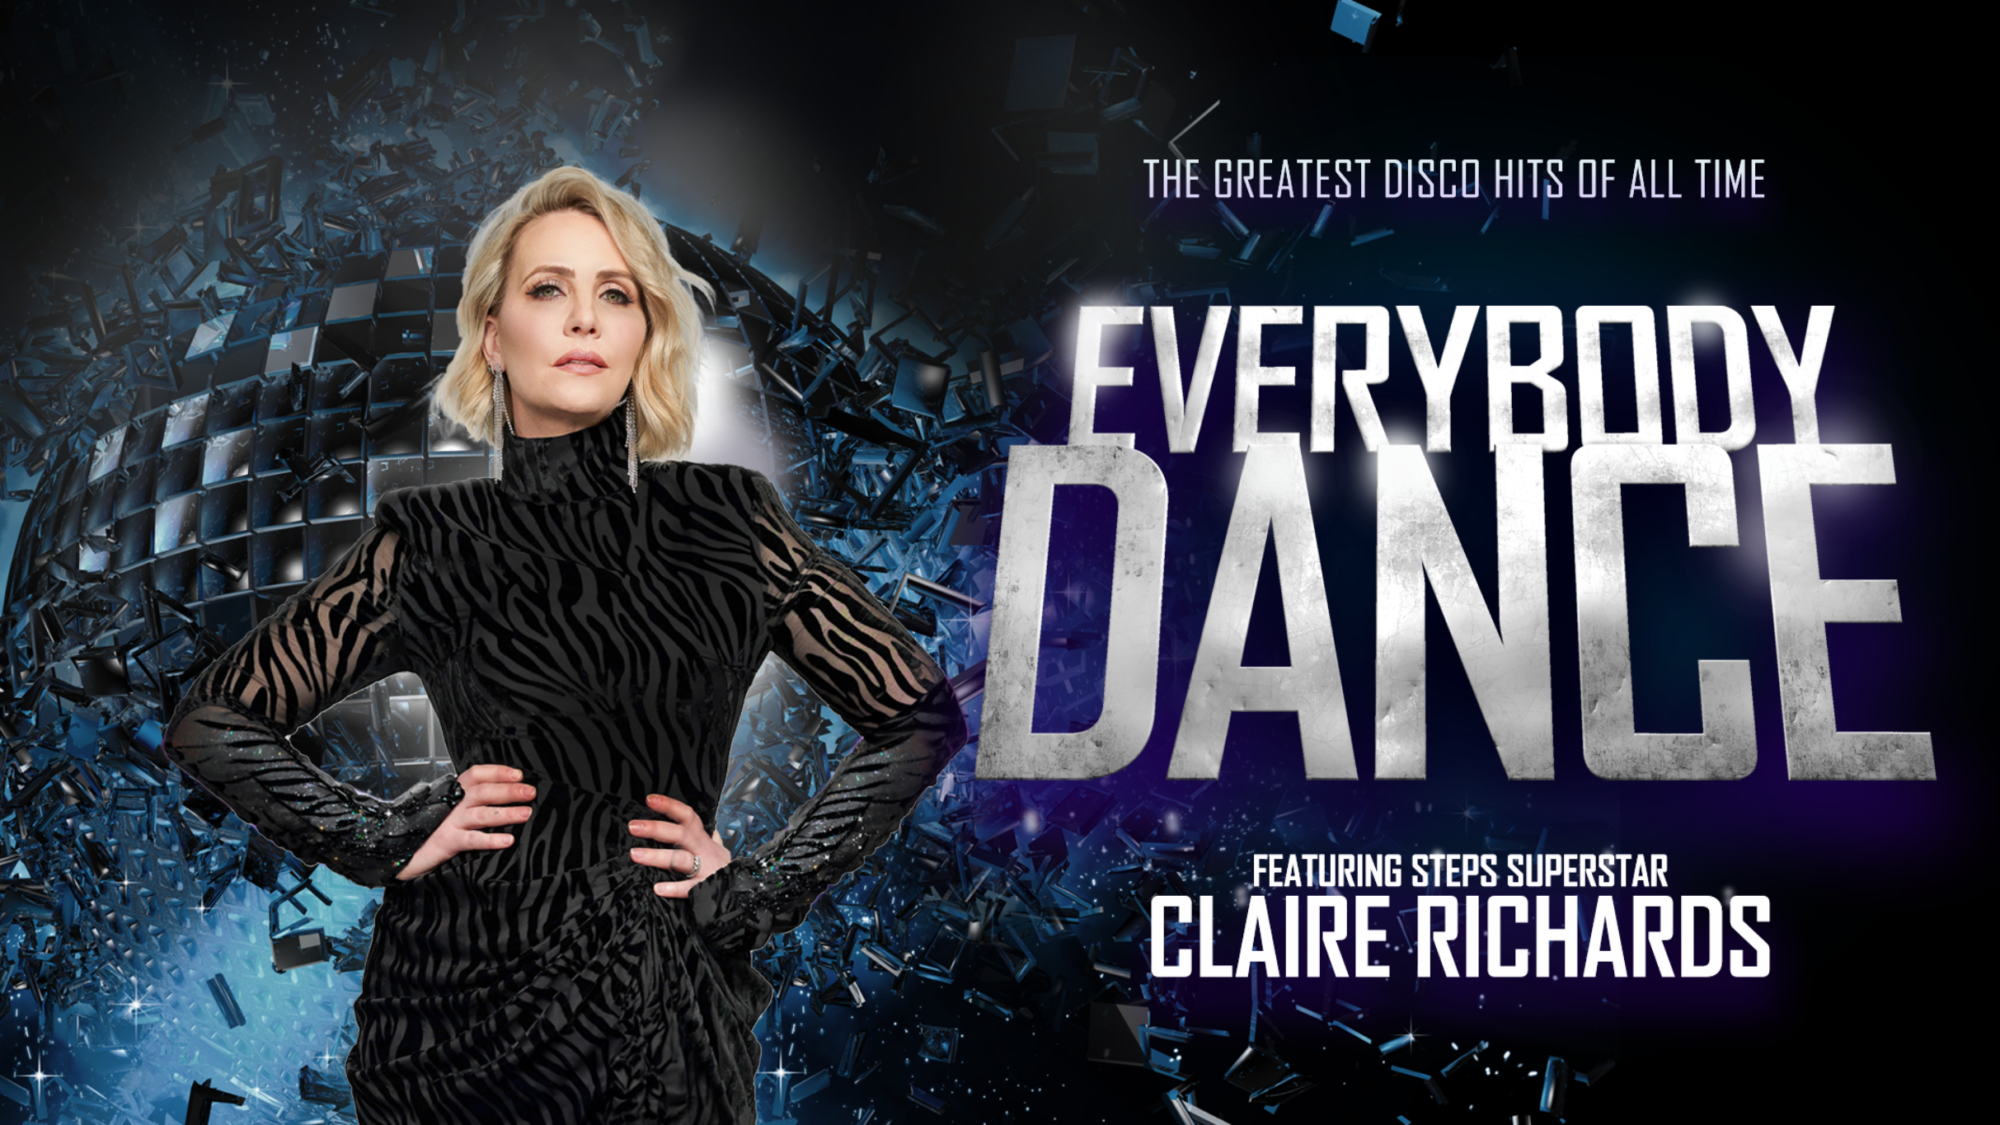 Image name Everybody Dance with Claire Richards at Hull City Hall Hull the 14 image from the post Events in Yorkshire.com.